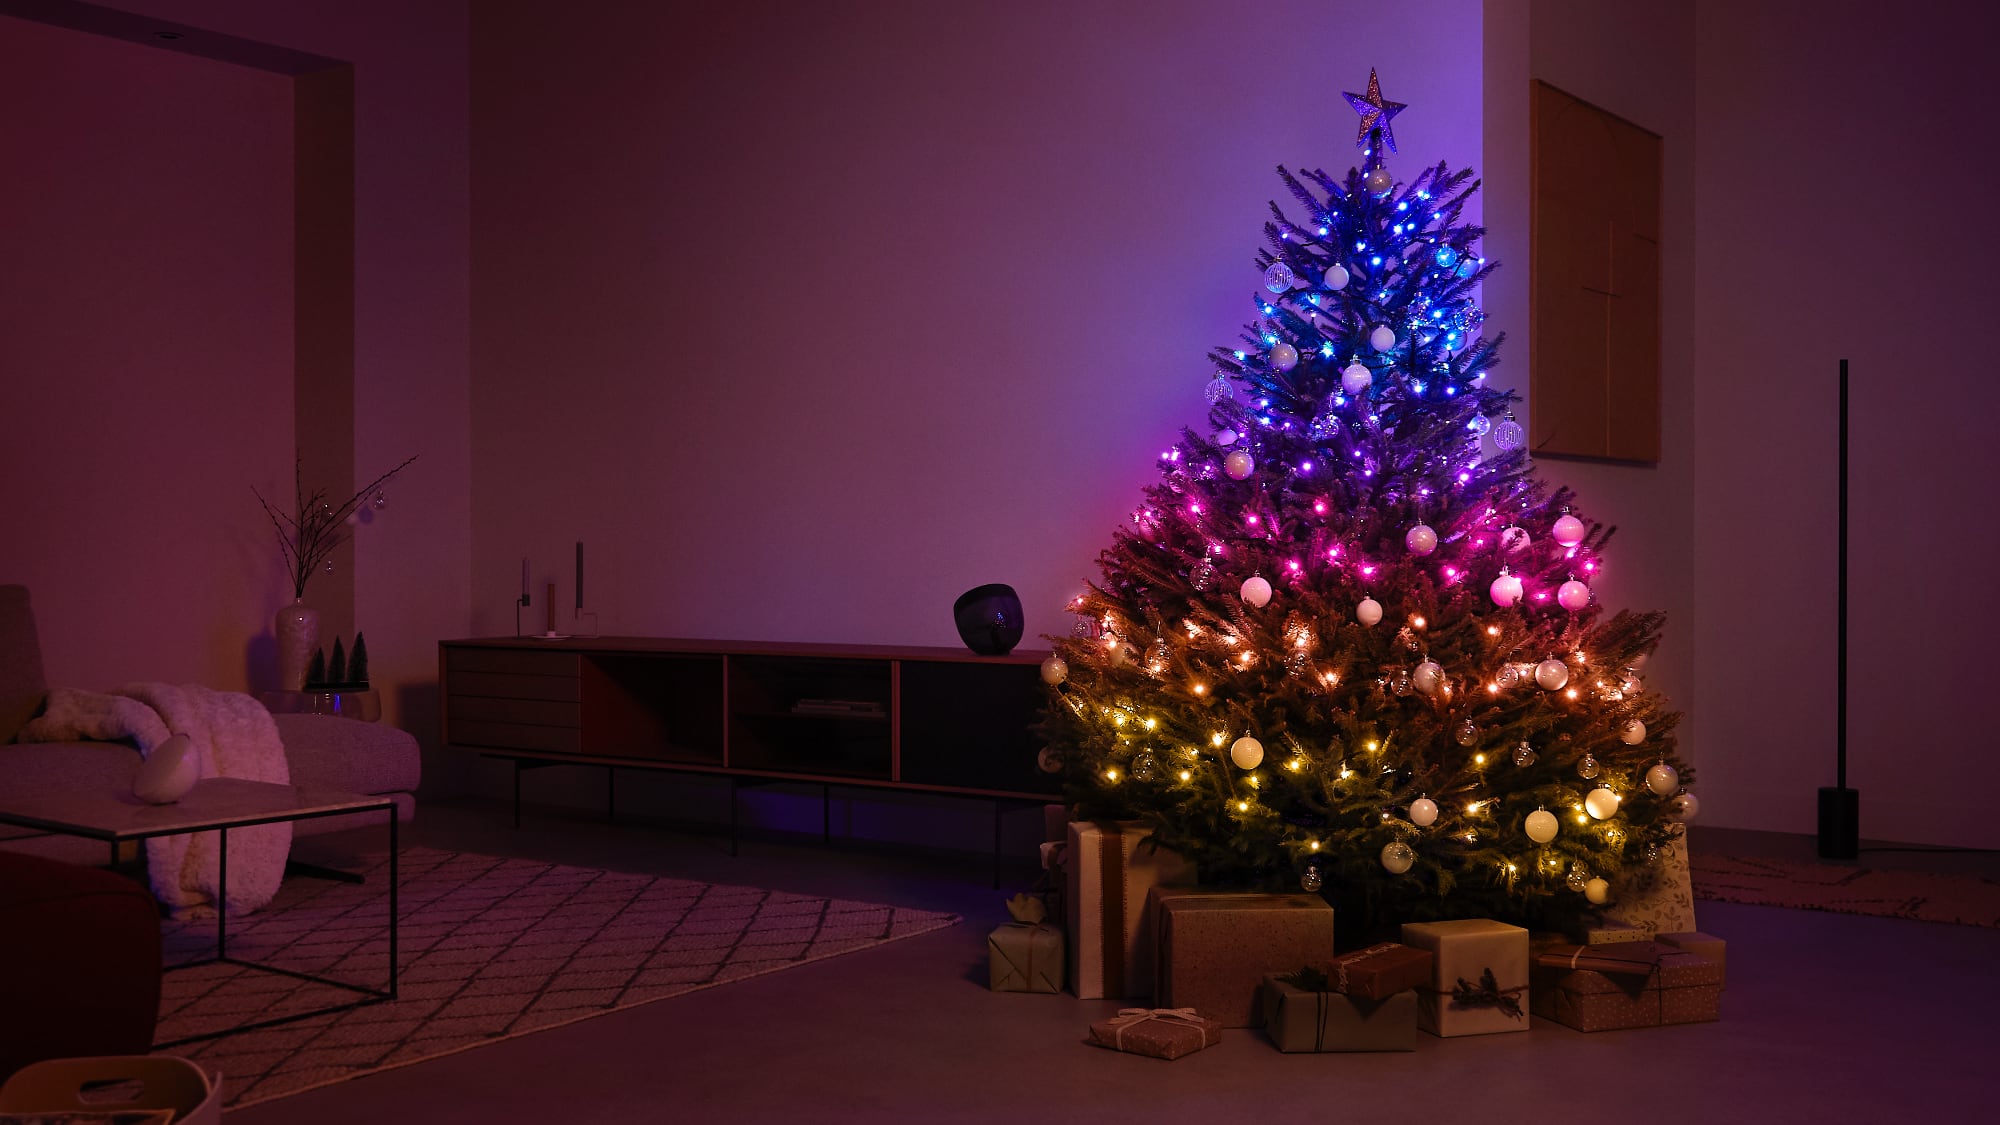 photo of Review: The Philips Hue Festavia Lights Are Expensive, But Perfect for Christmas Trees and Holiday Decorating image